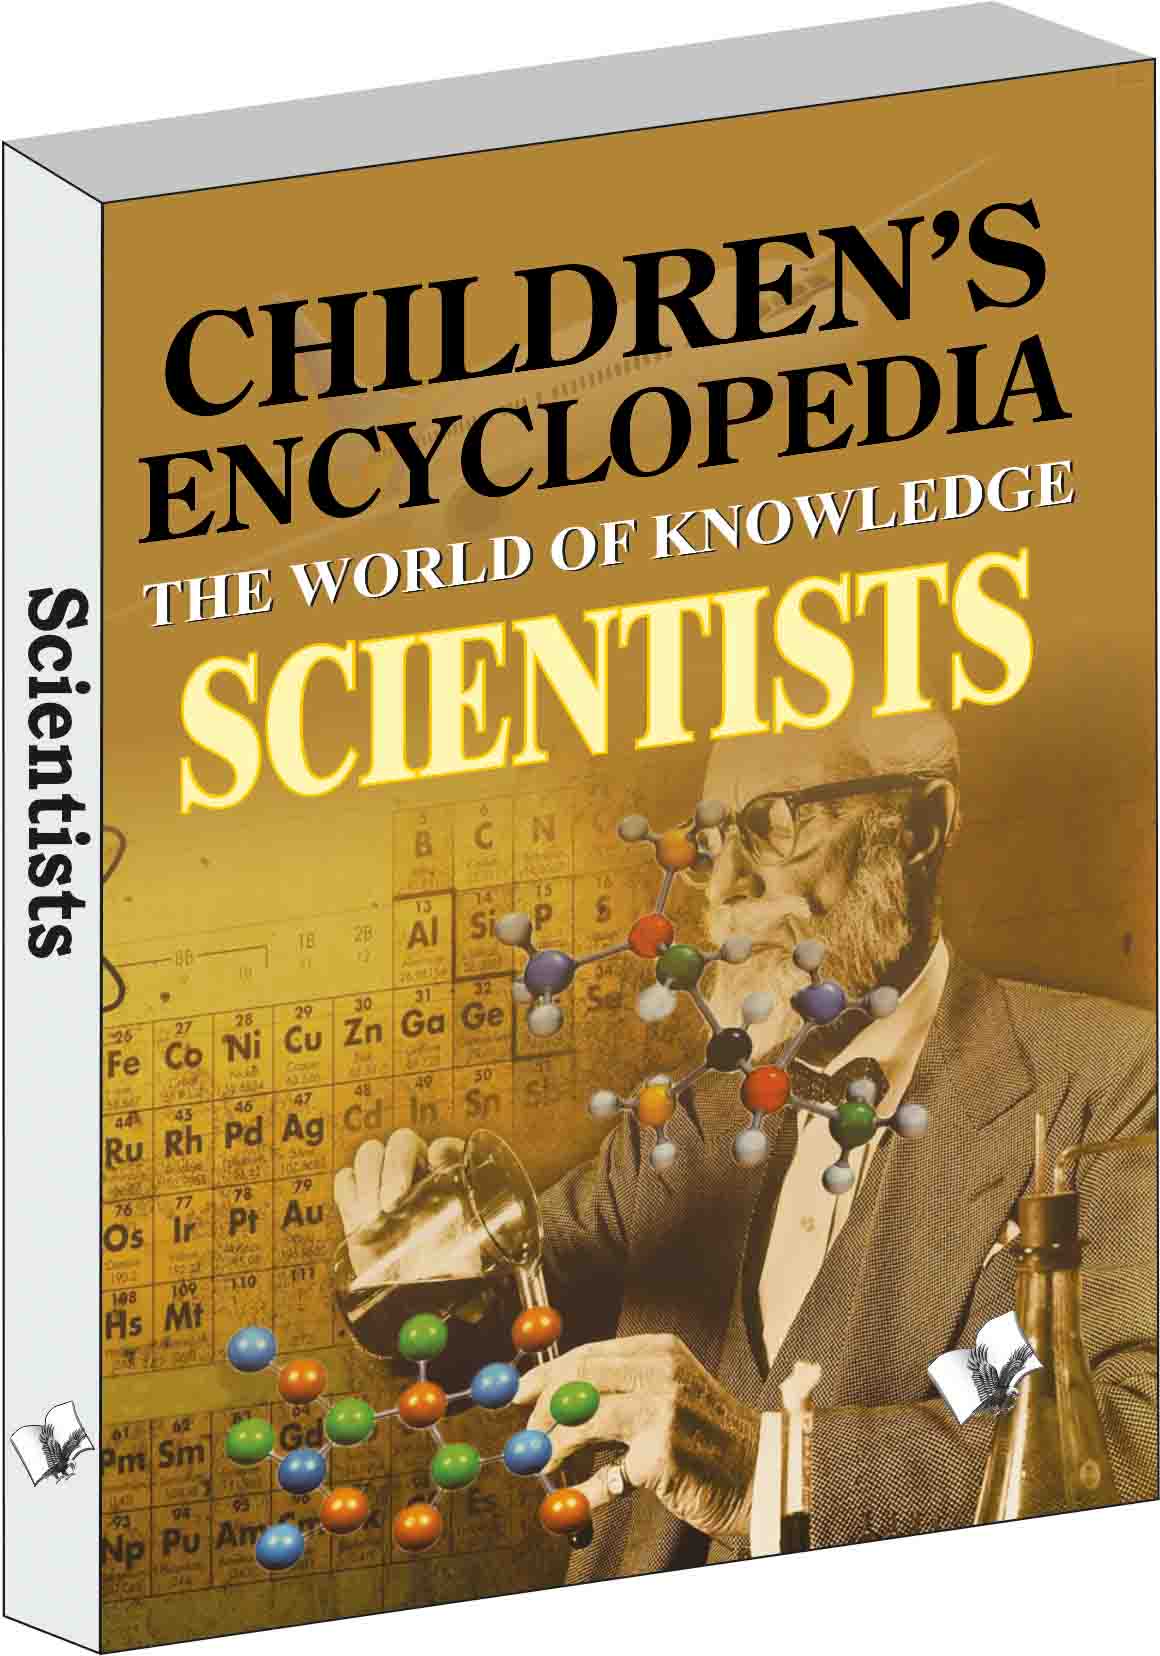 Children's Encyclopedia - Scientists-The world of knowledge for inquisitive minds